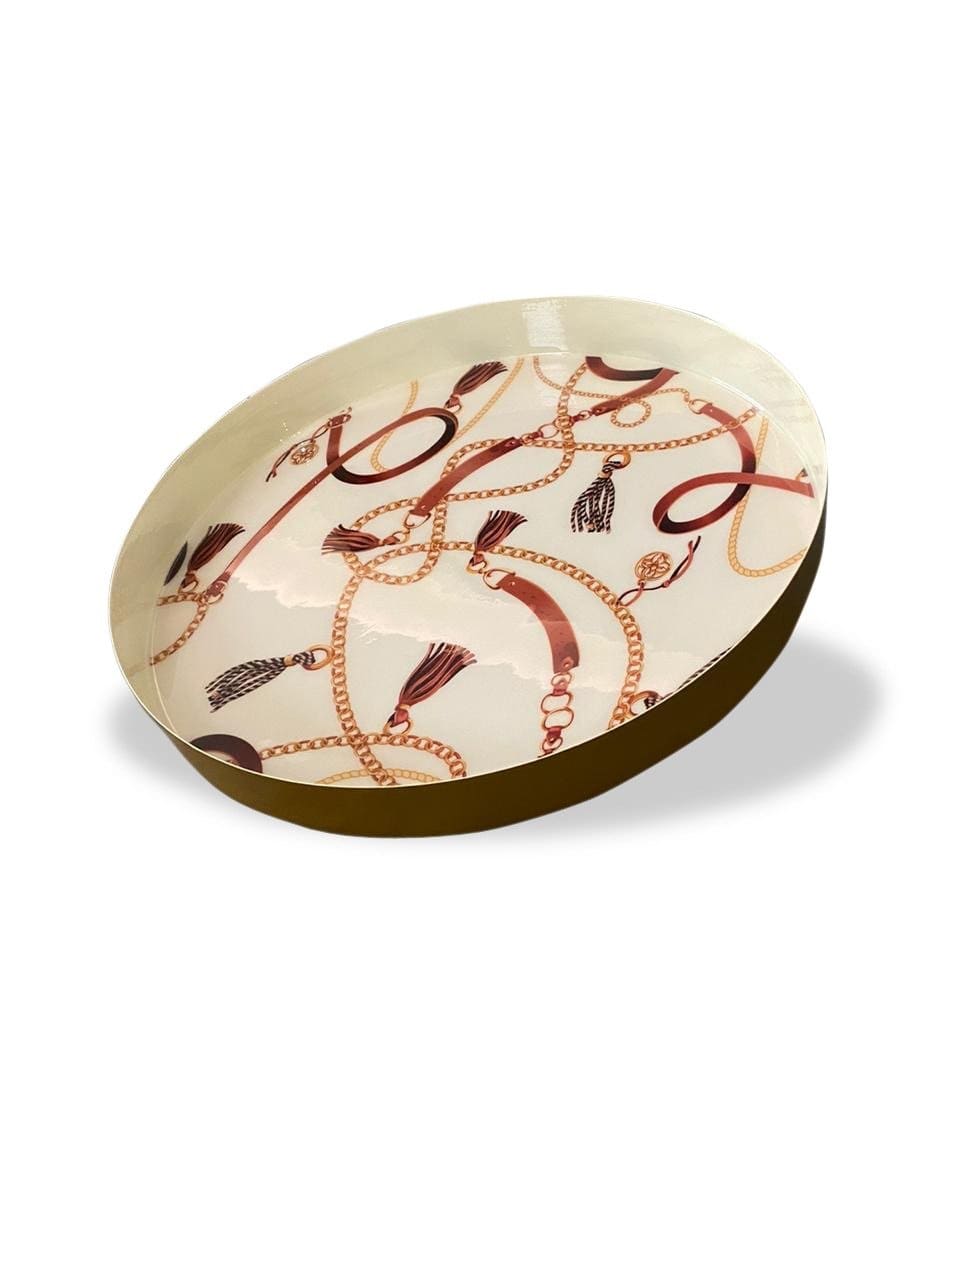 Home Decor Golden Brown Printed Serving Tray (12" inches) - The Decor Circle